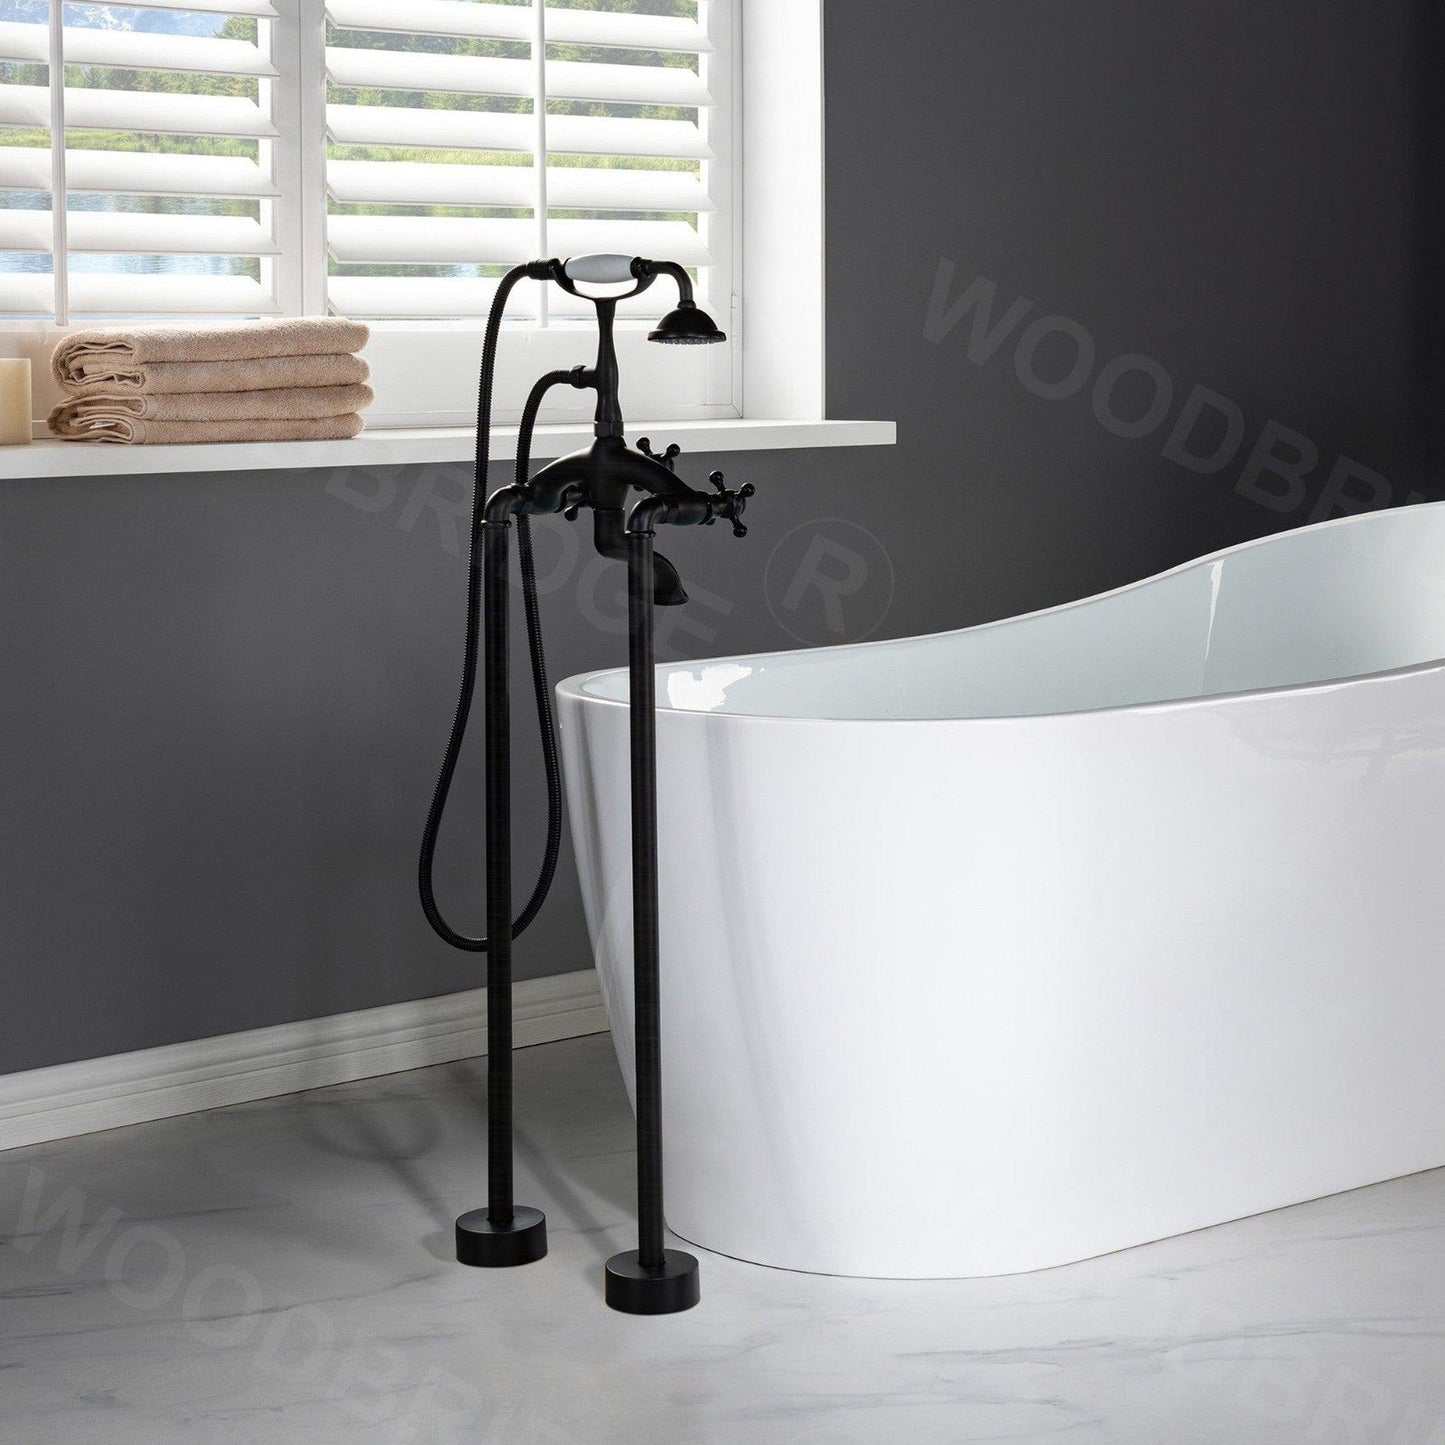 WoodBridge F0029ORB Oil Rubbed Bronze Freestanding Clawfoot Tub Filler Faucet With Hand Shower and Hose